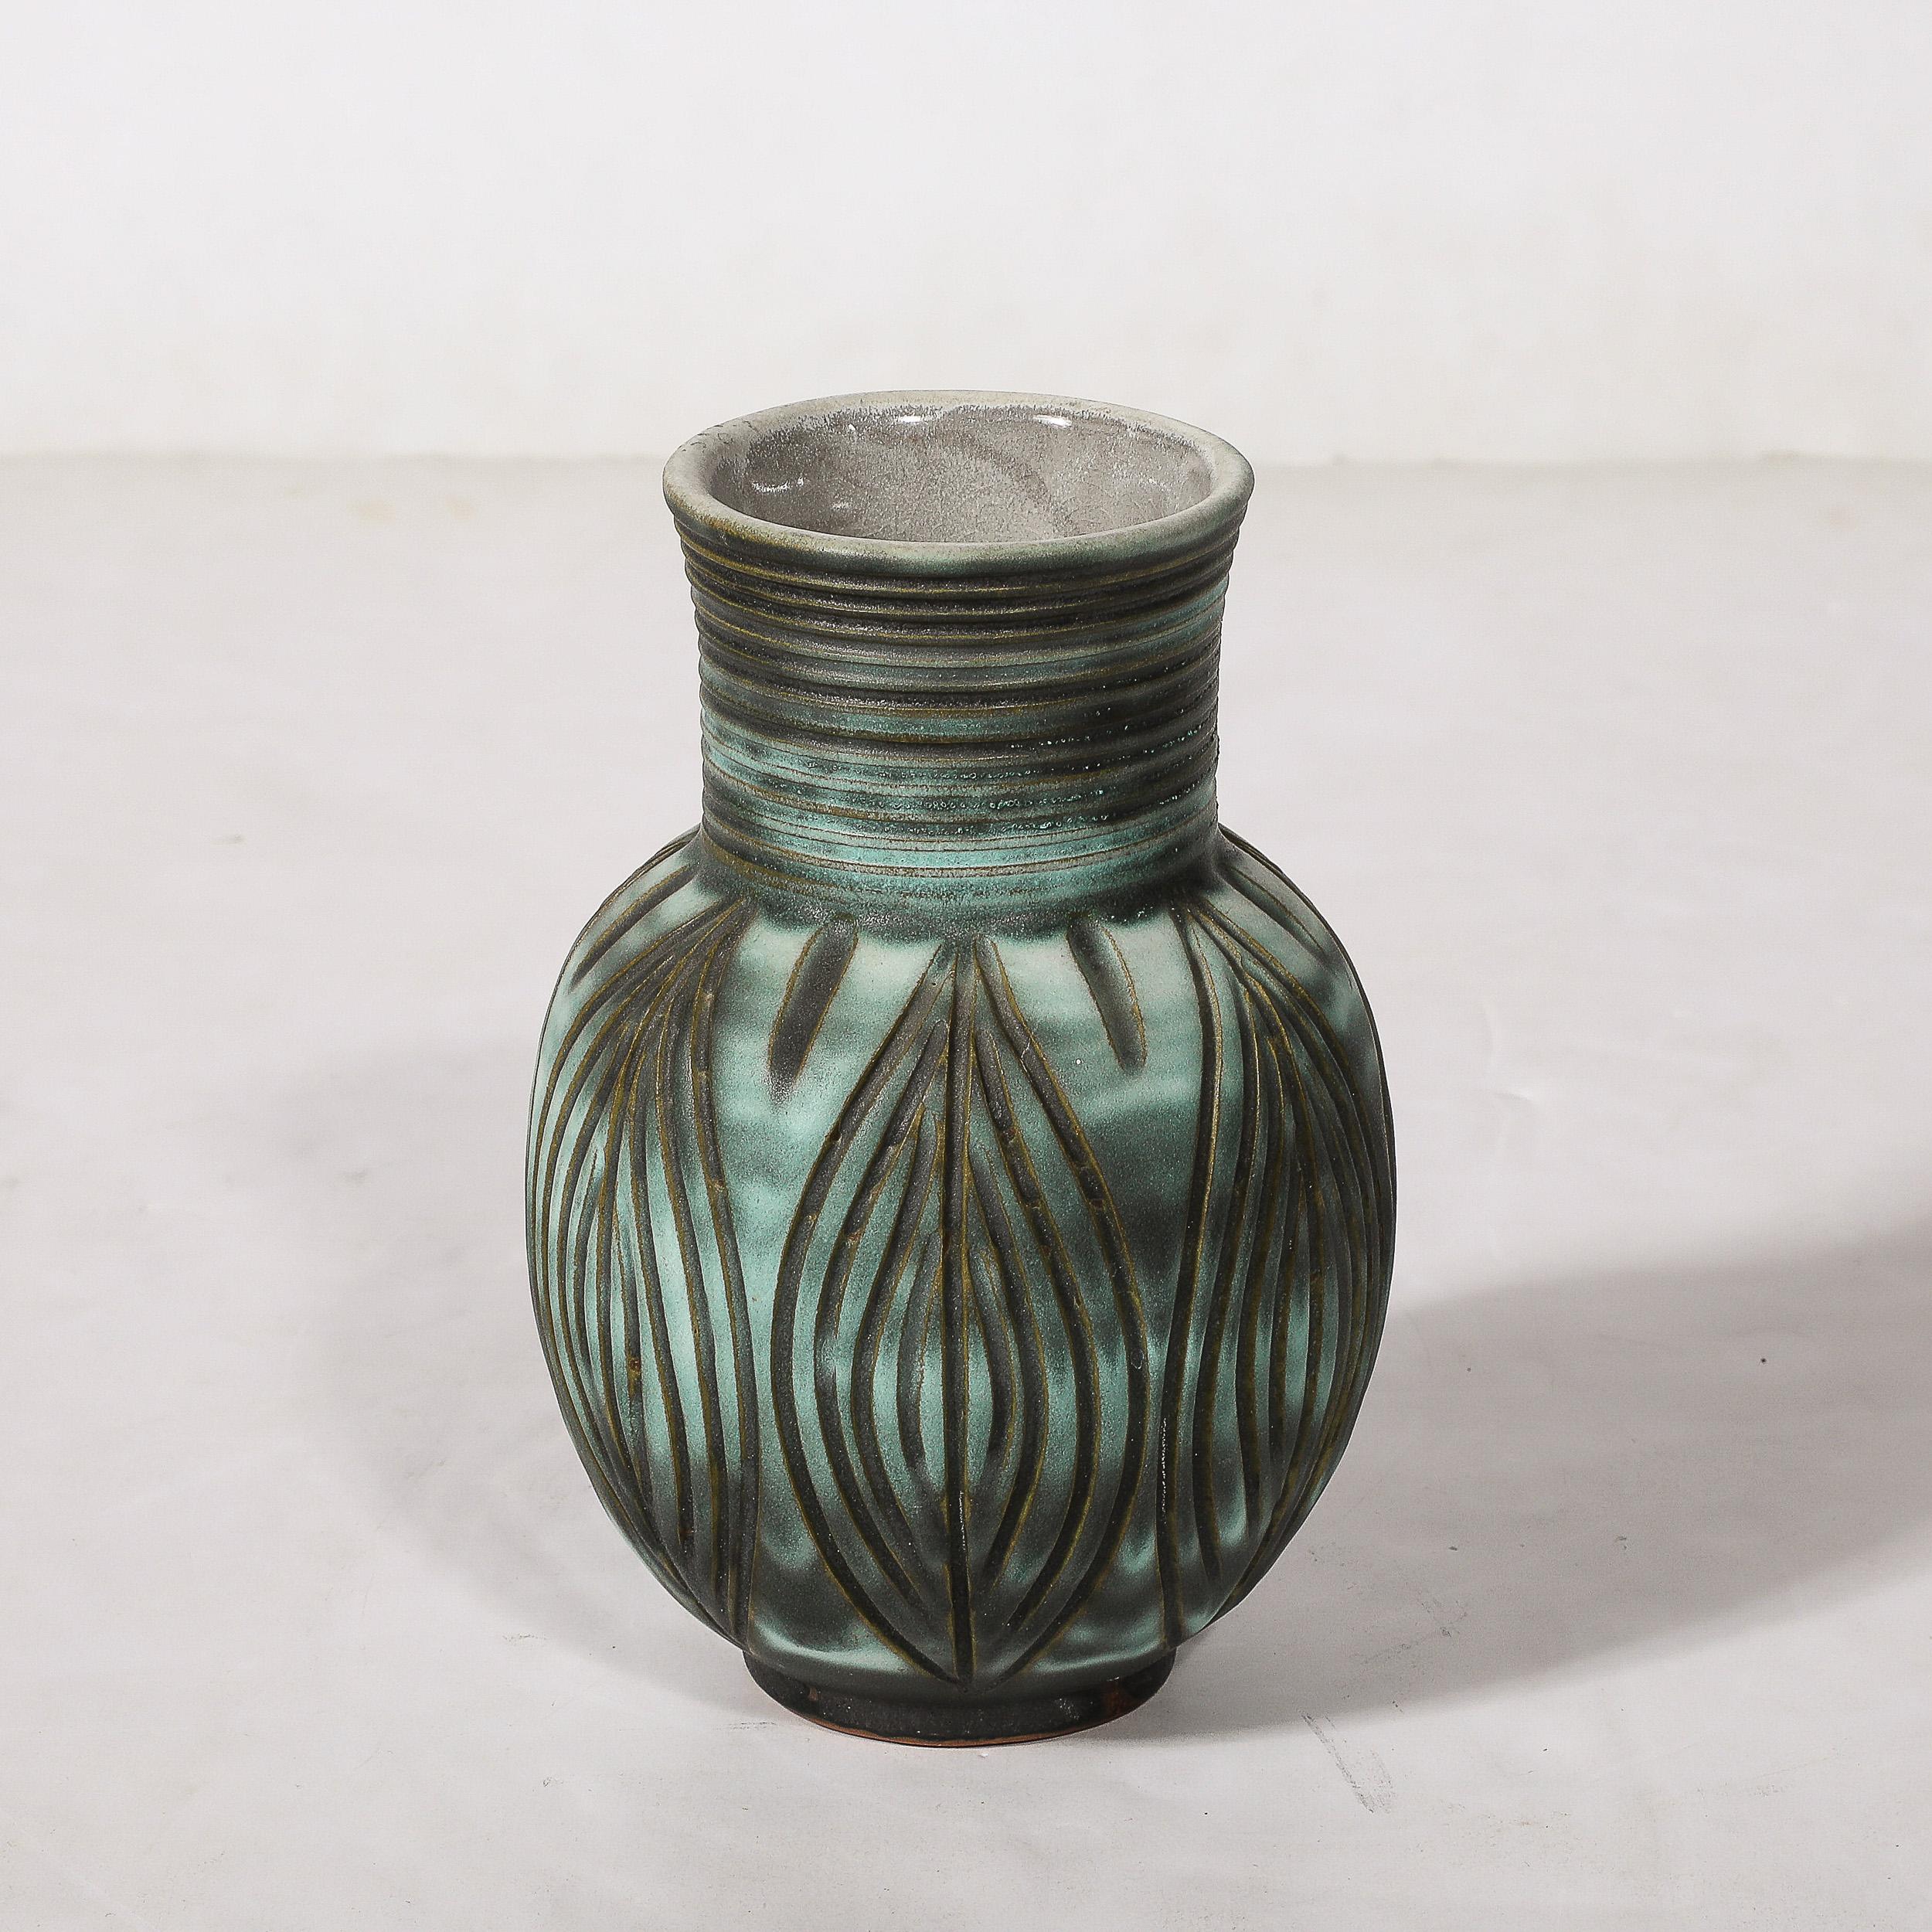 Glazed Mid-Century Modernist Linear Grooved Teal/Smoked Umber Vase by Design Techniques For Sale